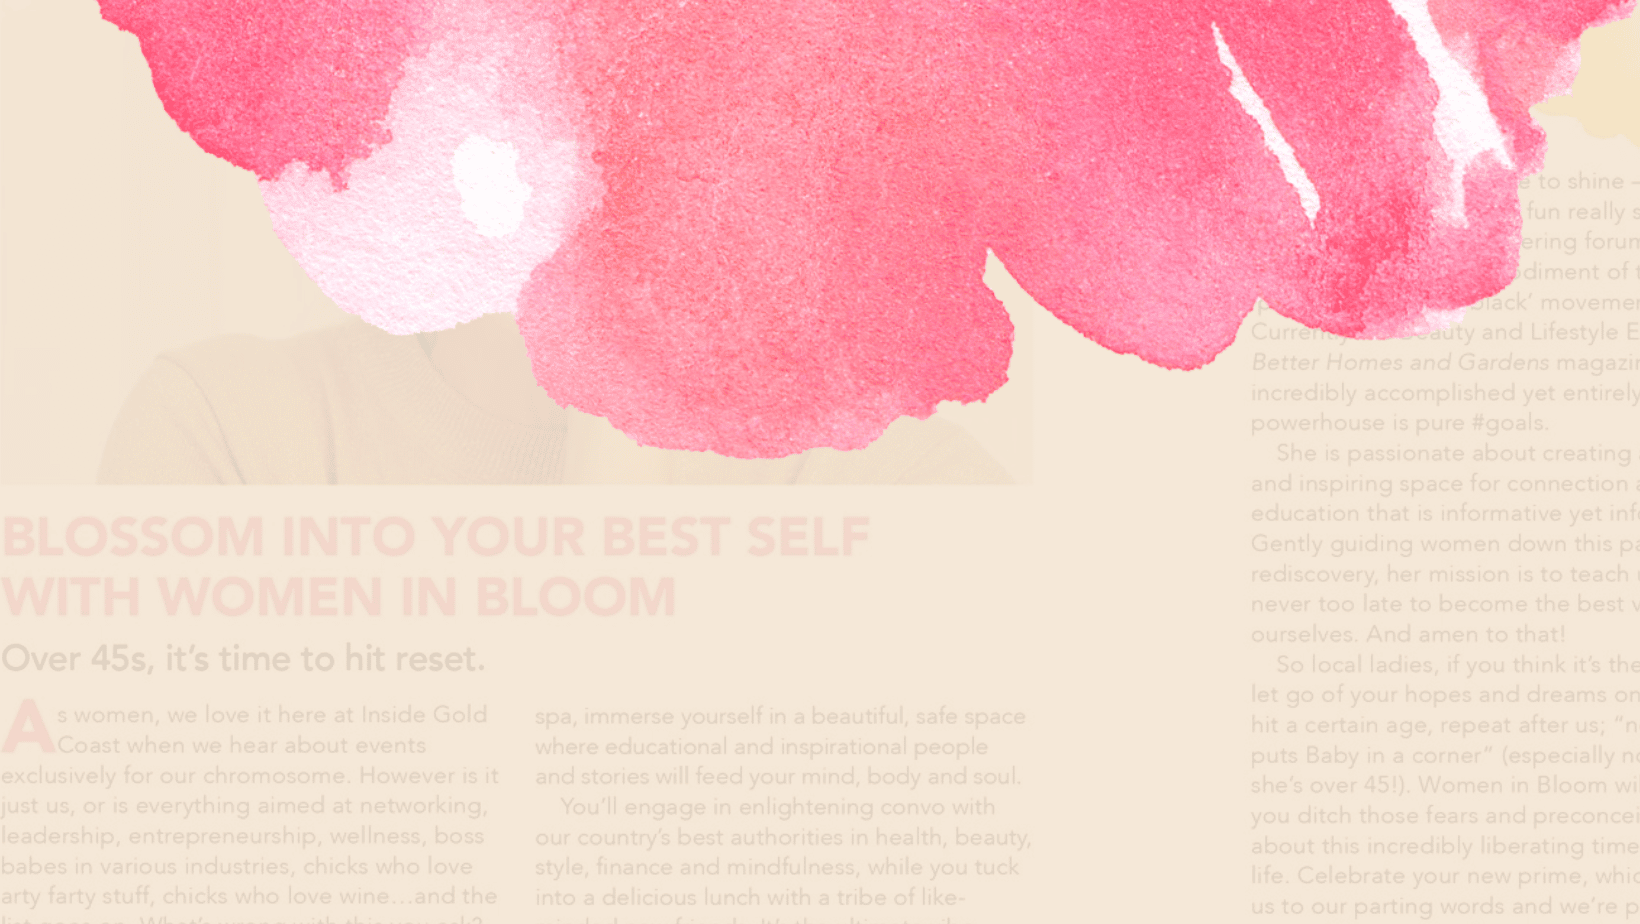 BLOSSOM INTO YOUR BEST SELF WITH WOMEN IN BLOOM